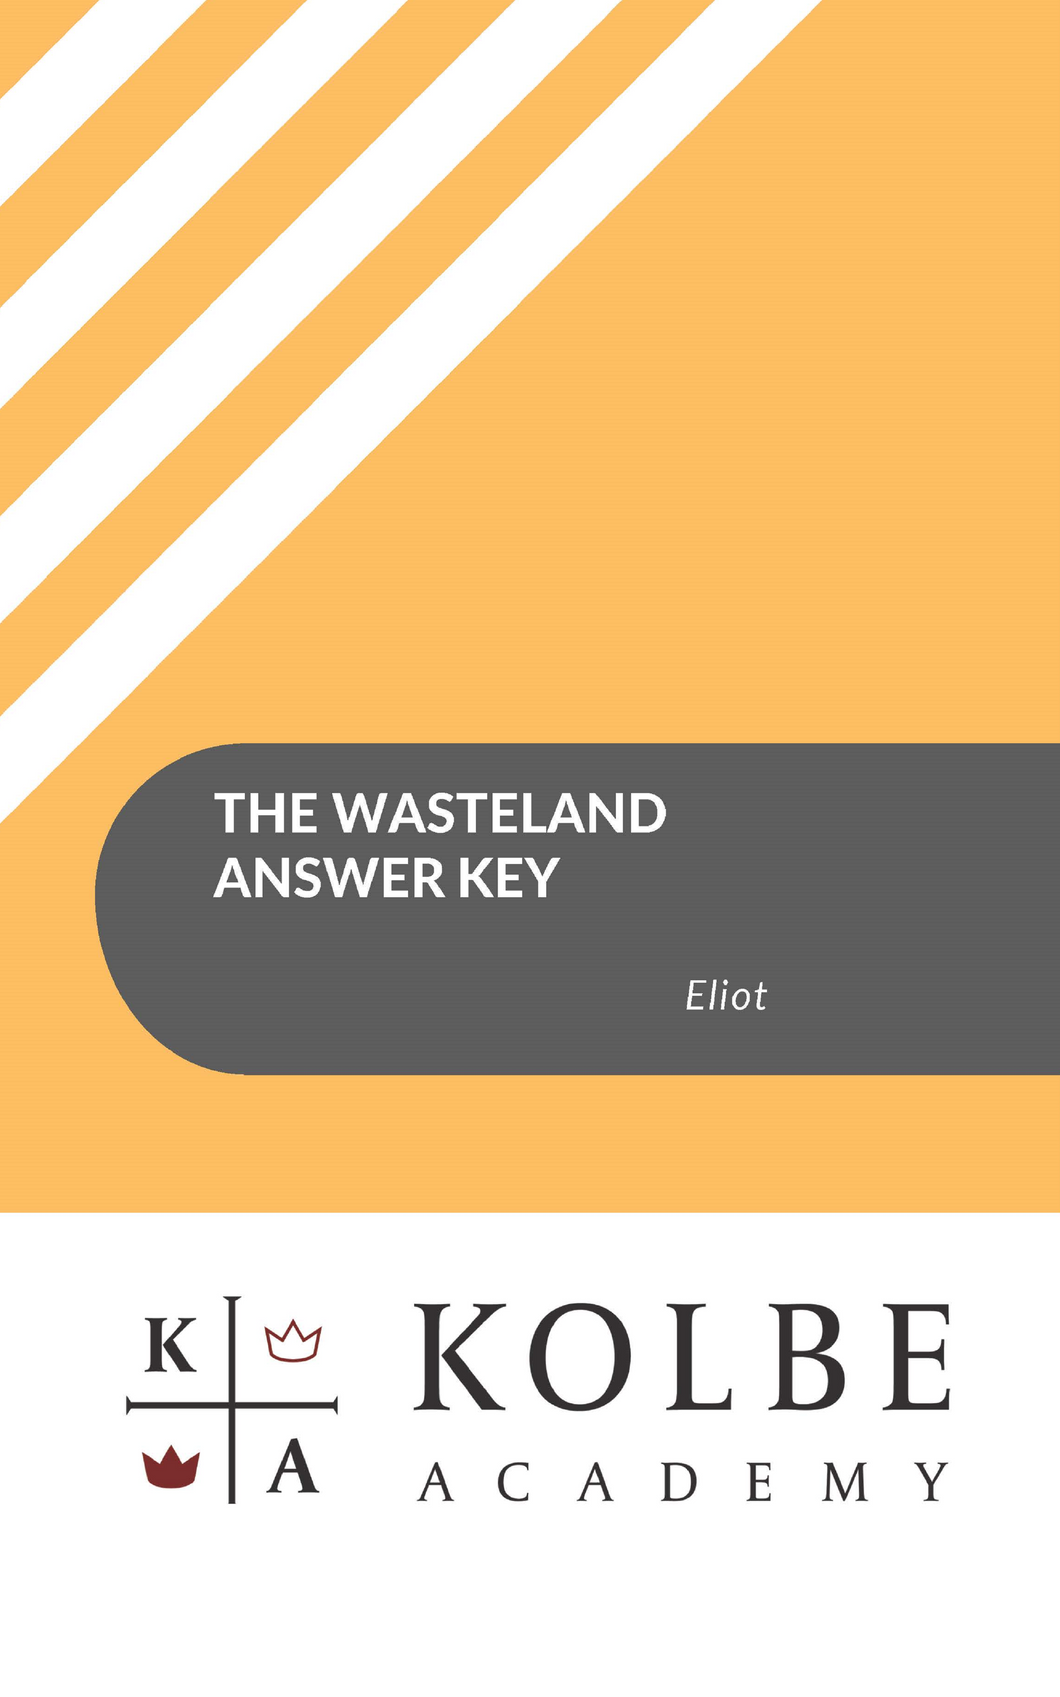 The Waste Land, Prufrock and Other Poems Answer Key